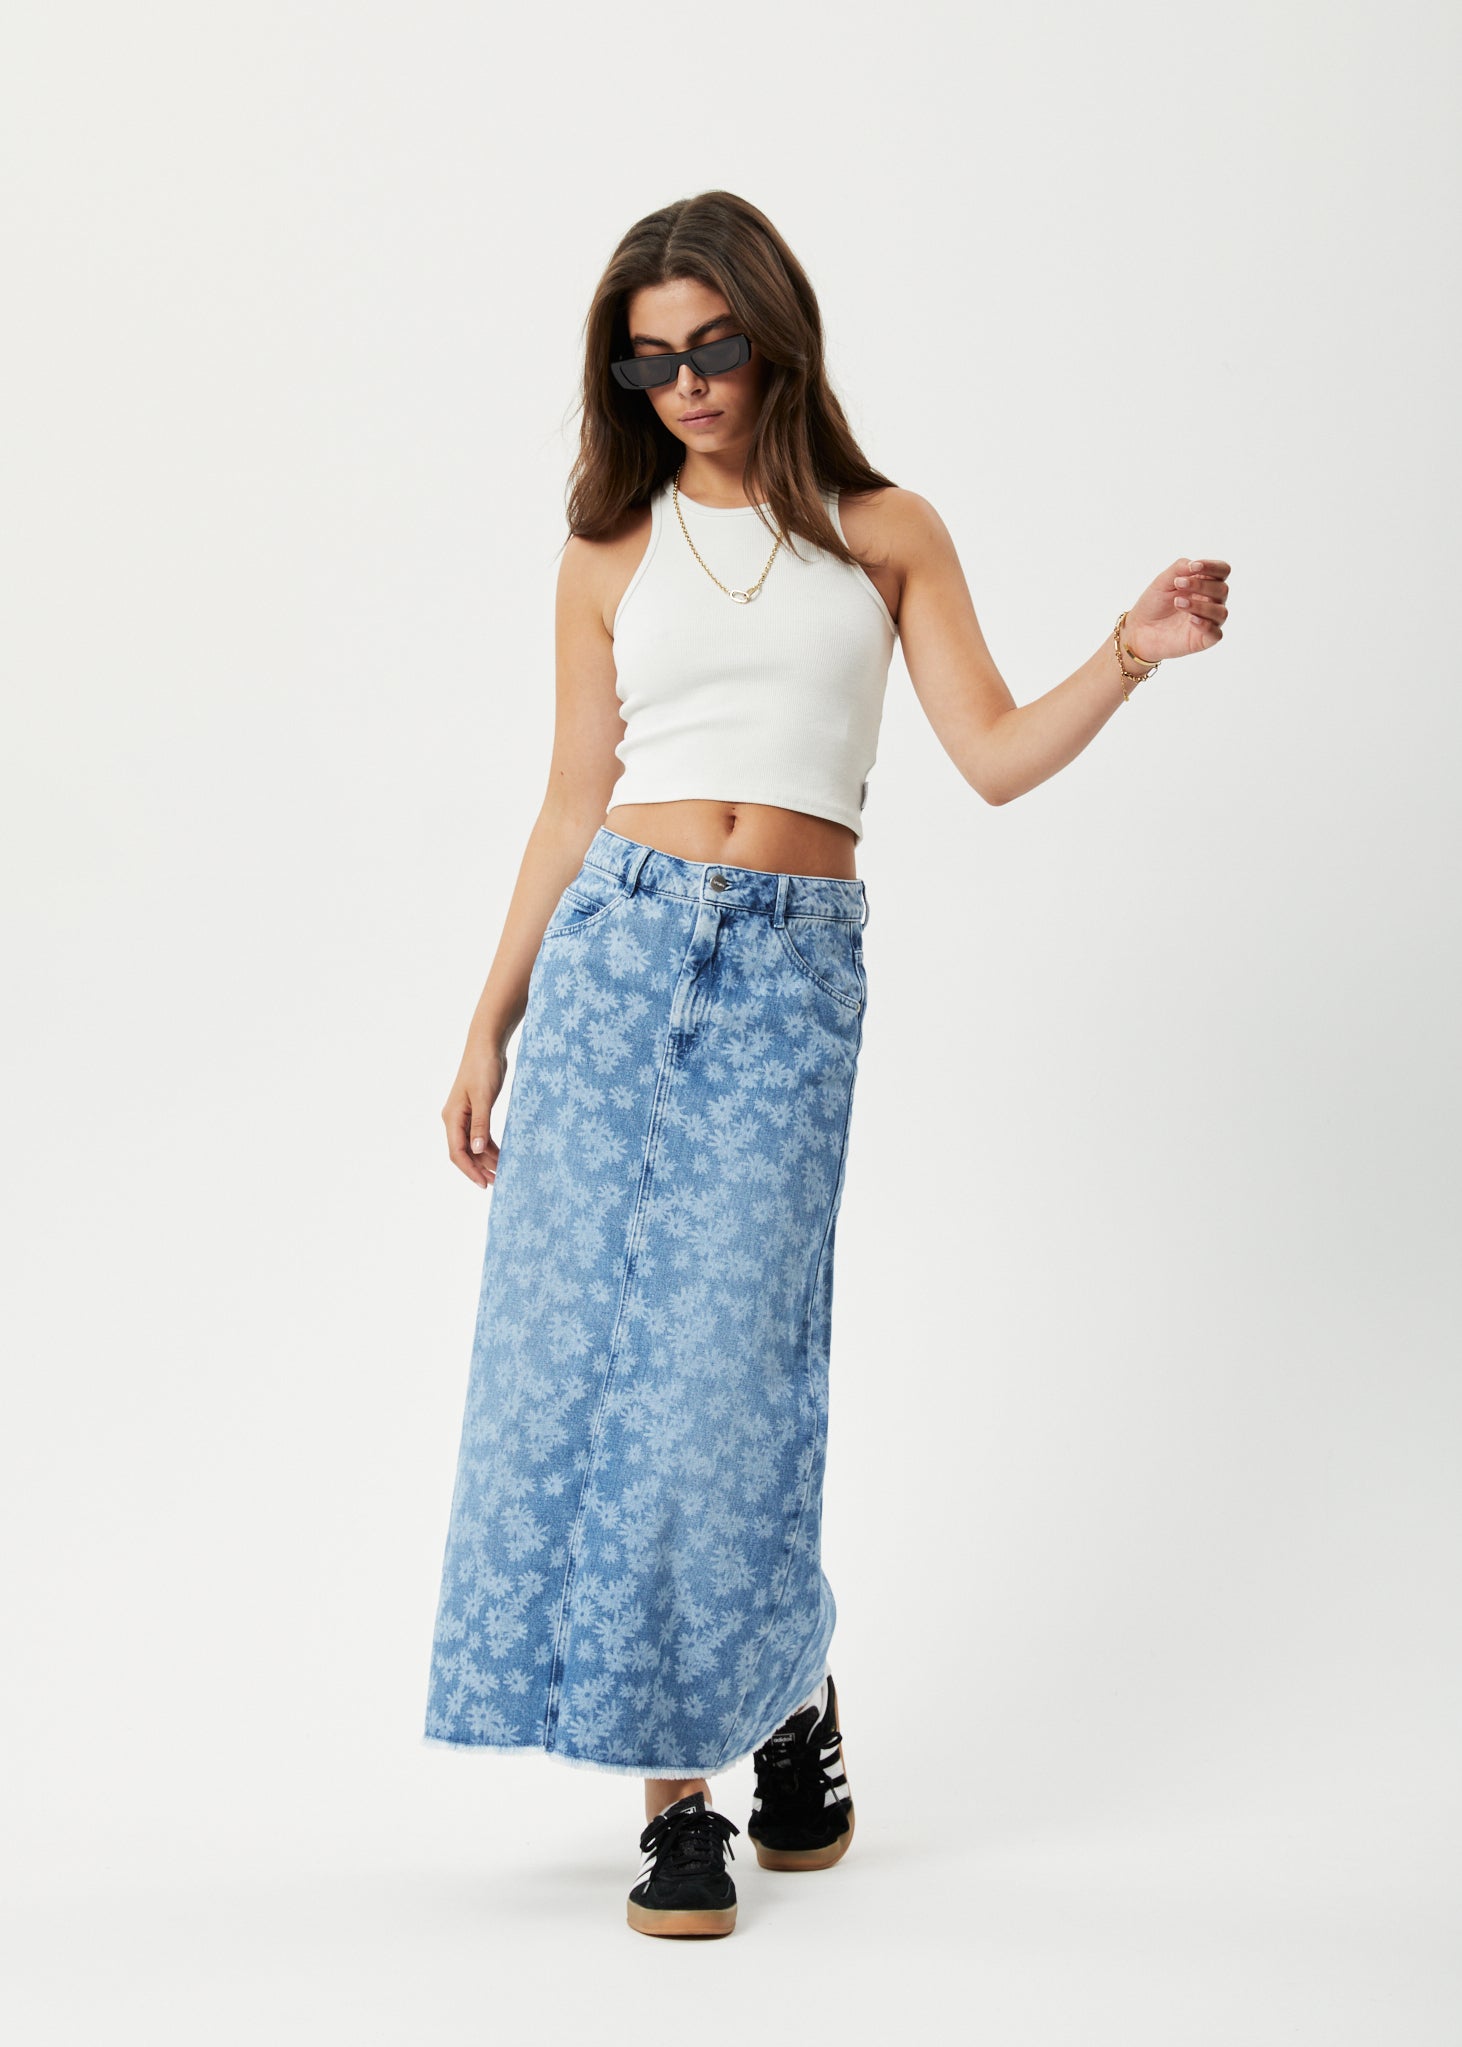 Denim midi skirts are back  heres where you can shop the seasons look   Mirror Online